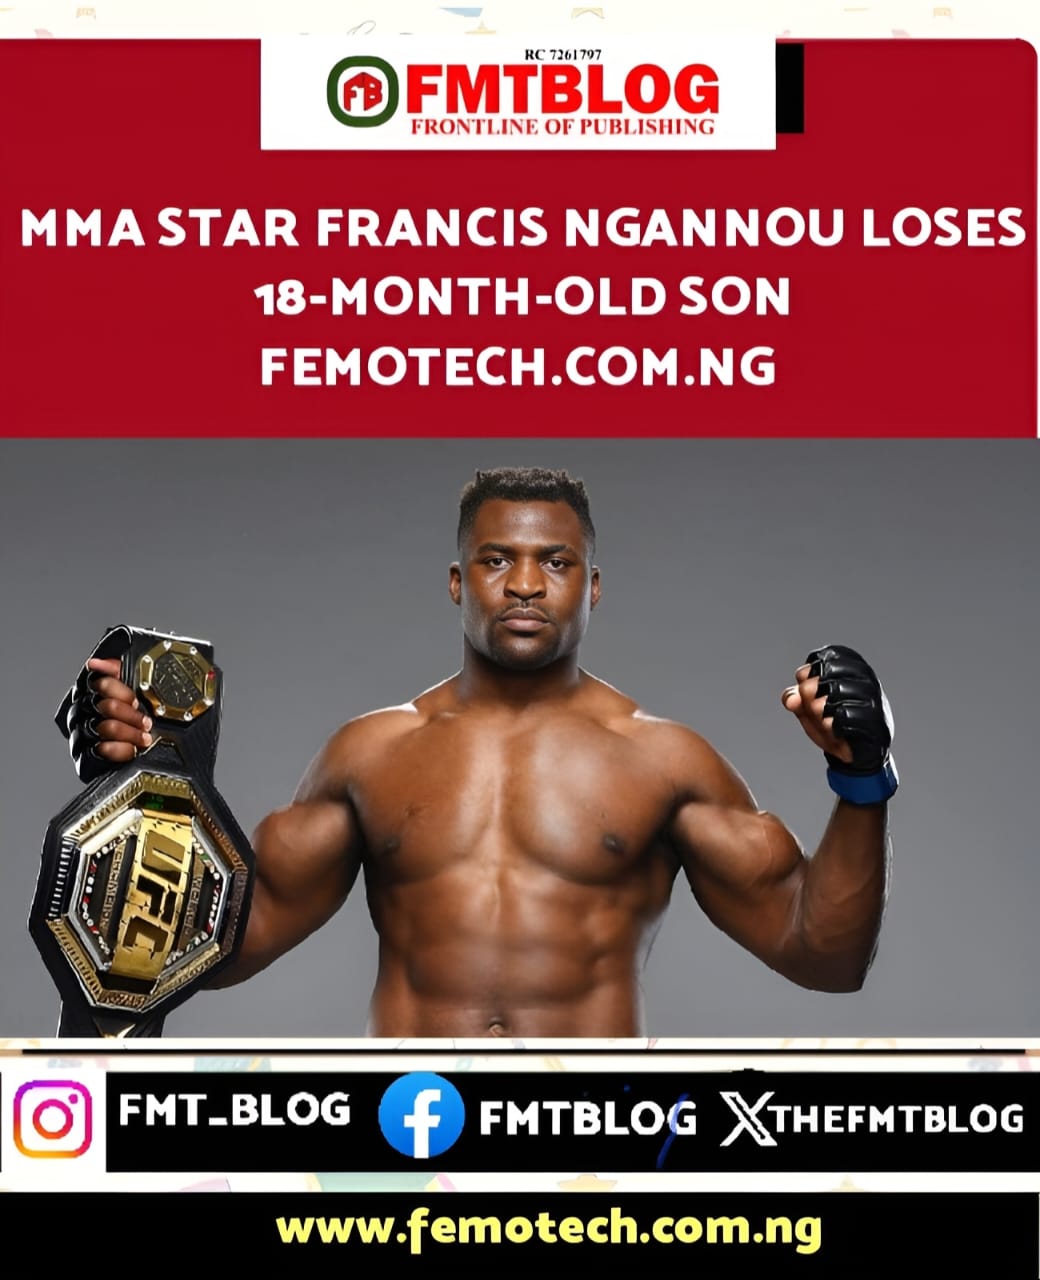 MMA Star Francis Ngannou Loses 18-Month-Old Son